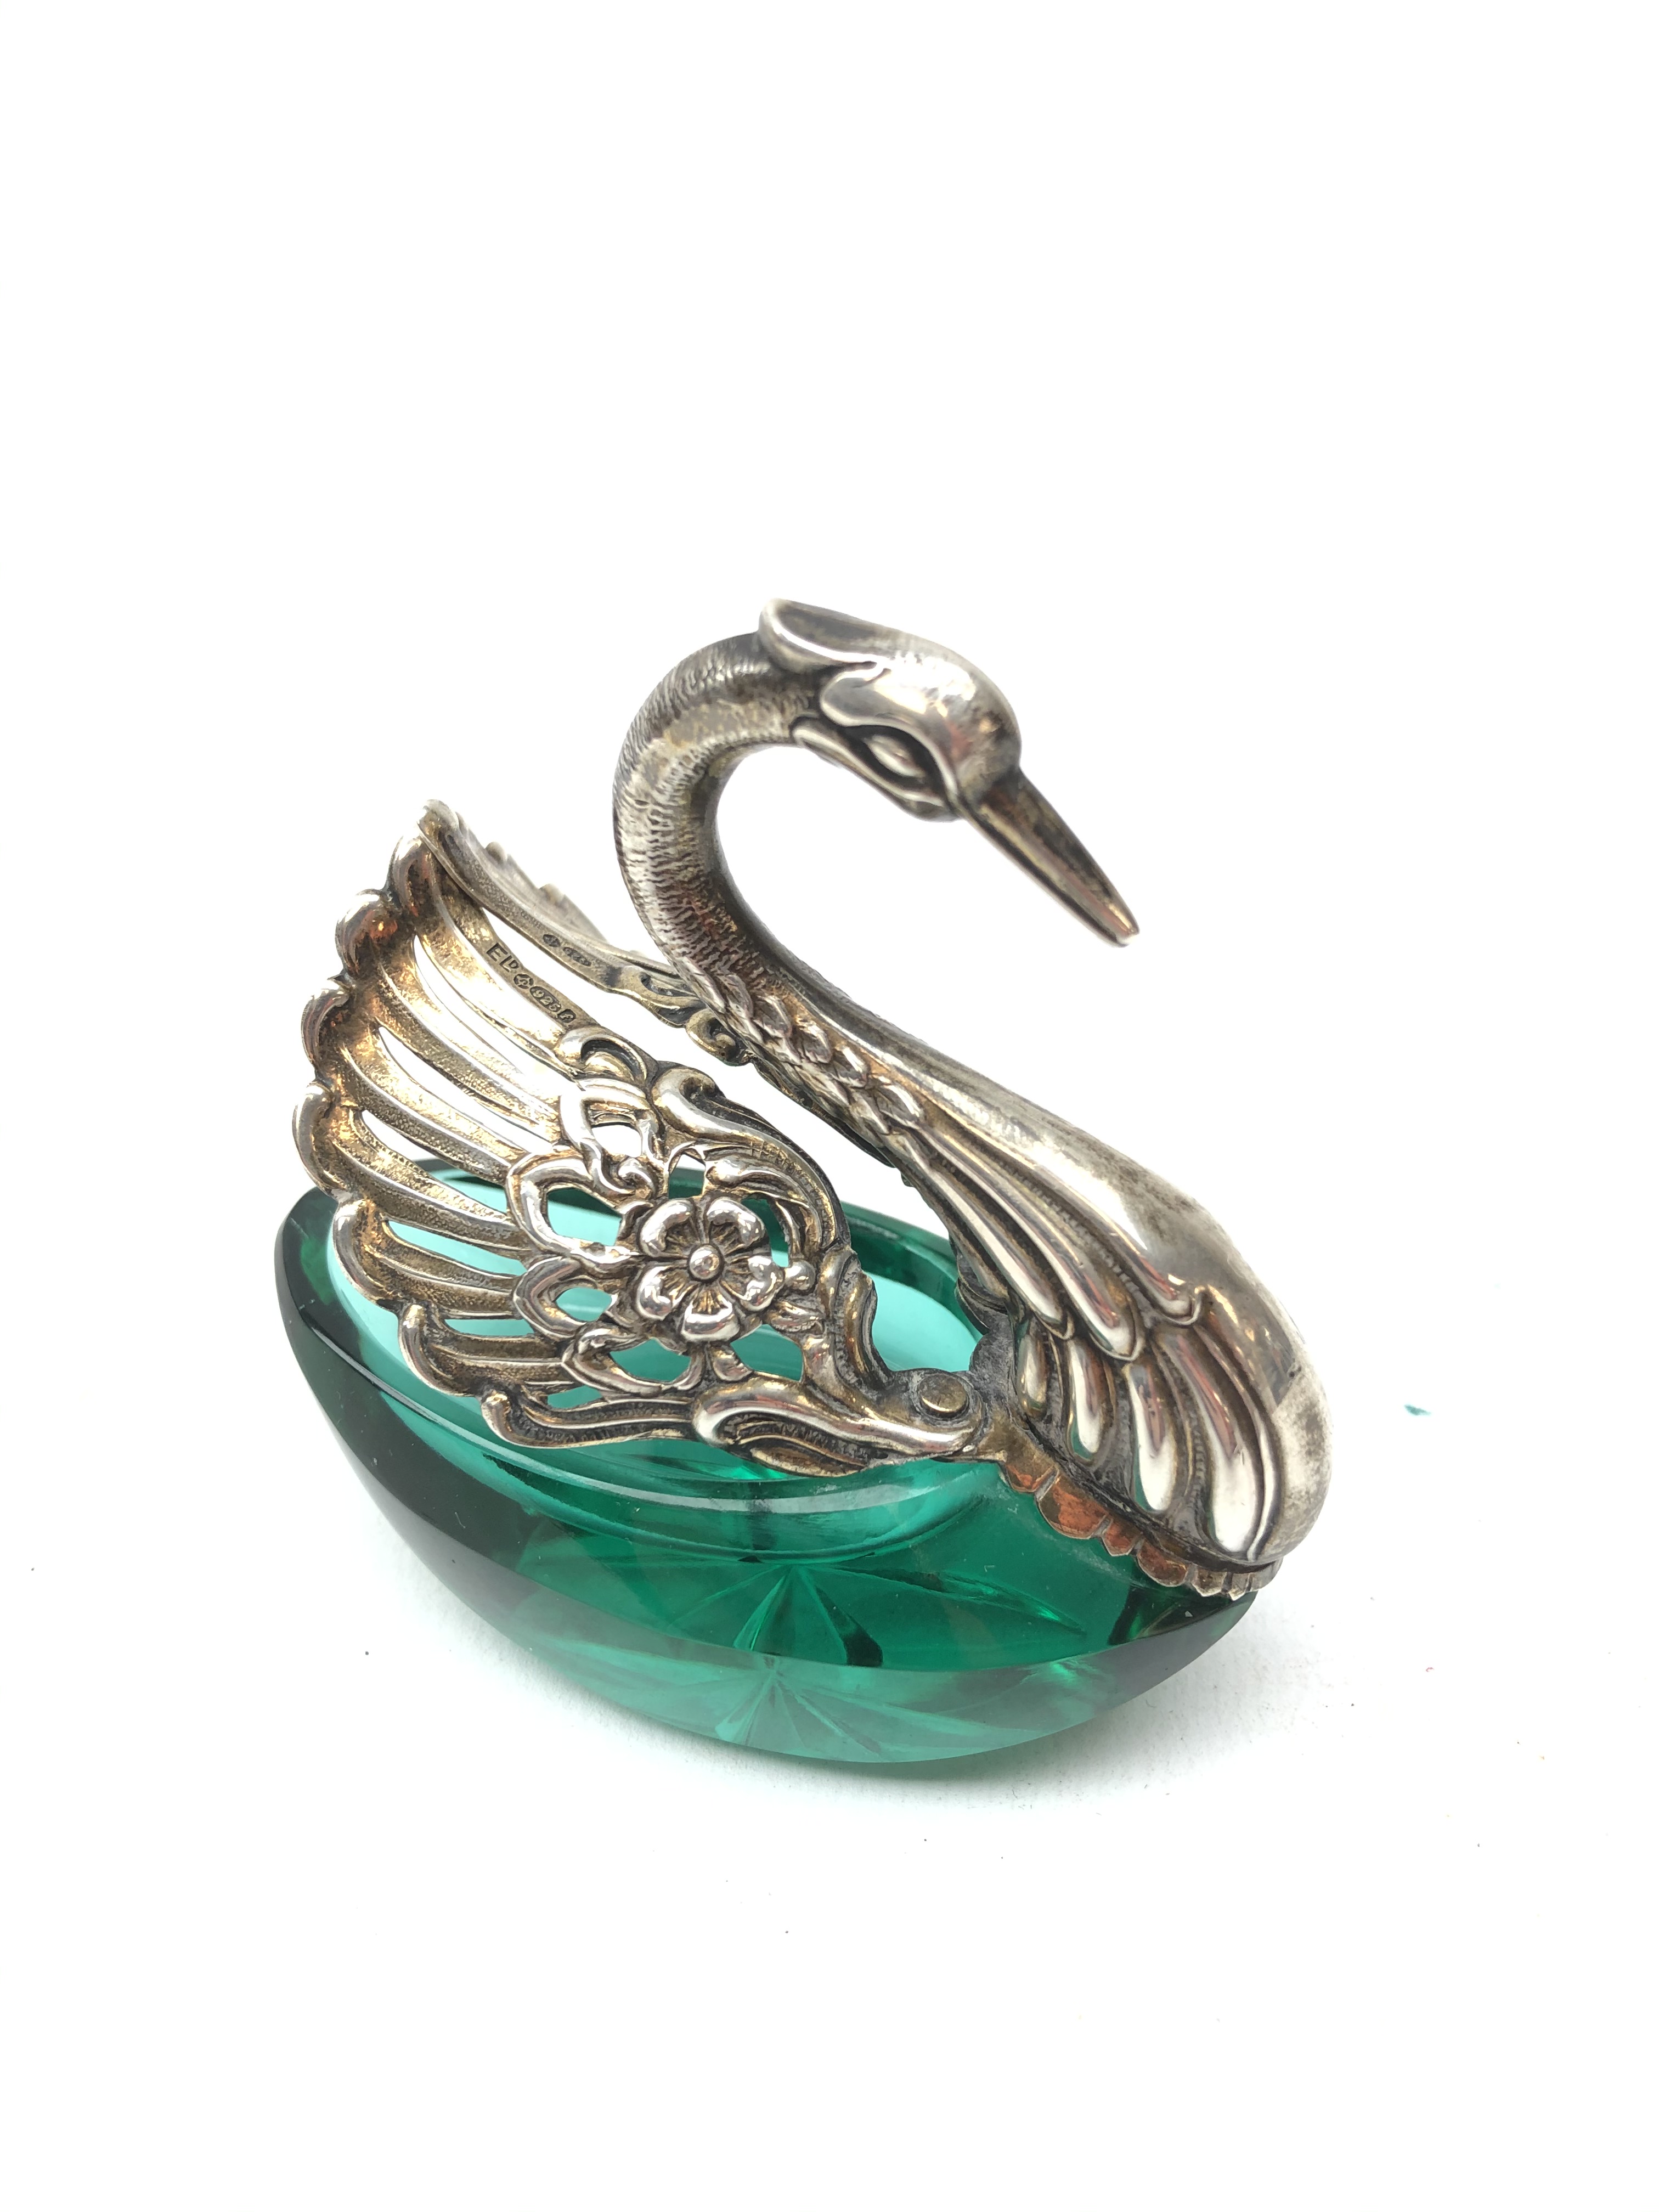 Emerald cut glass salt in the form of a Swan, silver swinging wings and neck, import marks,